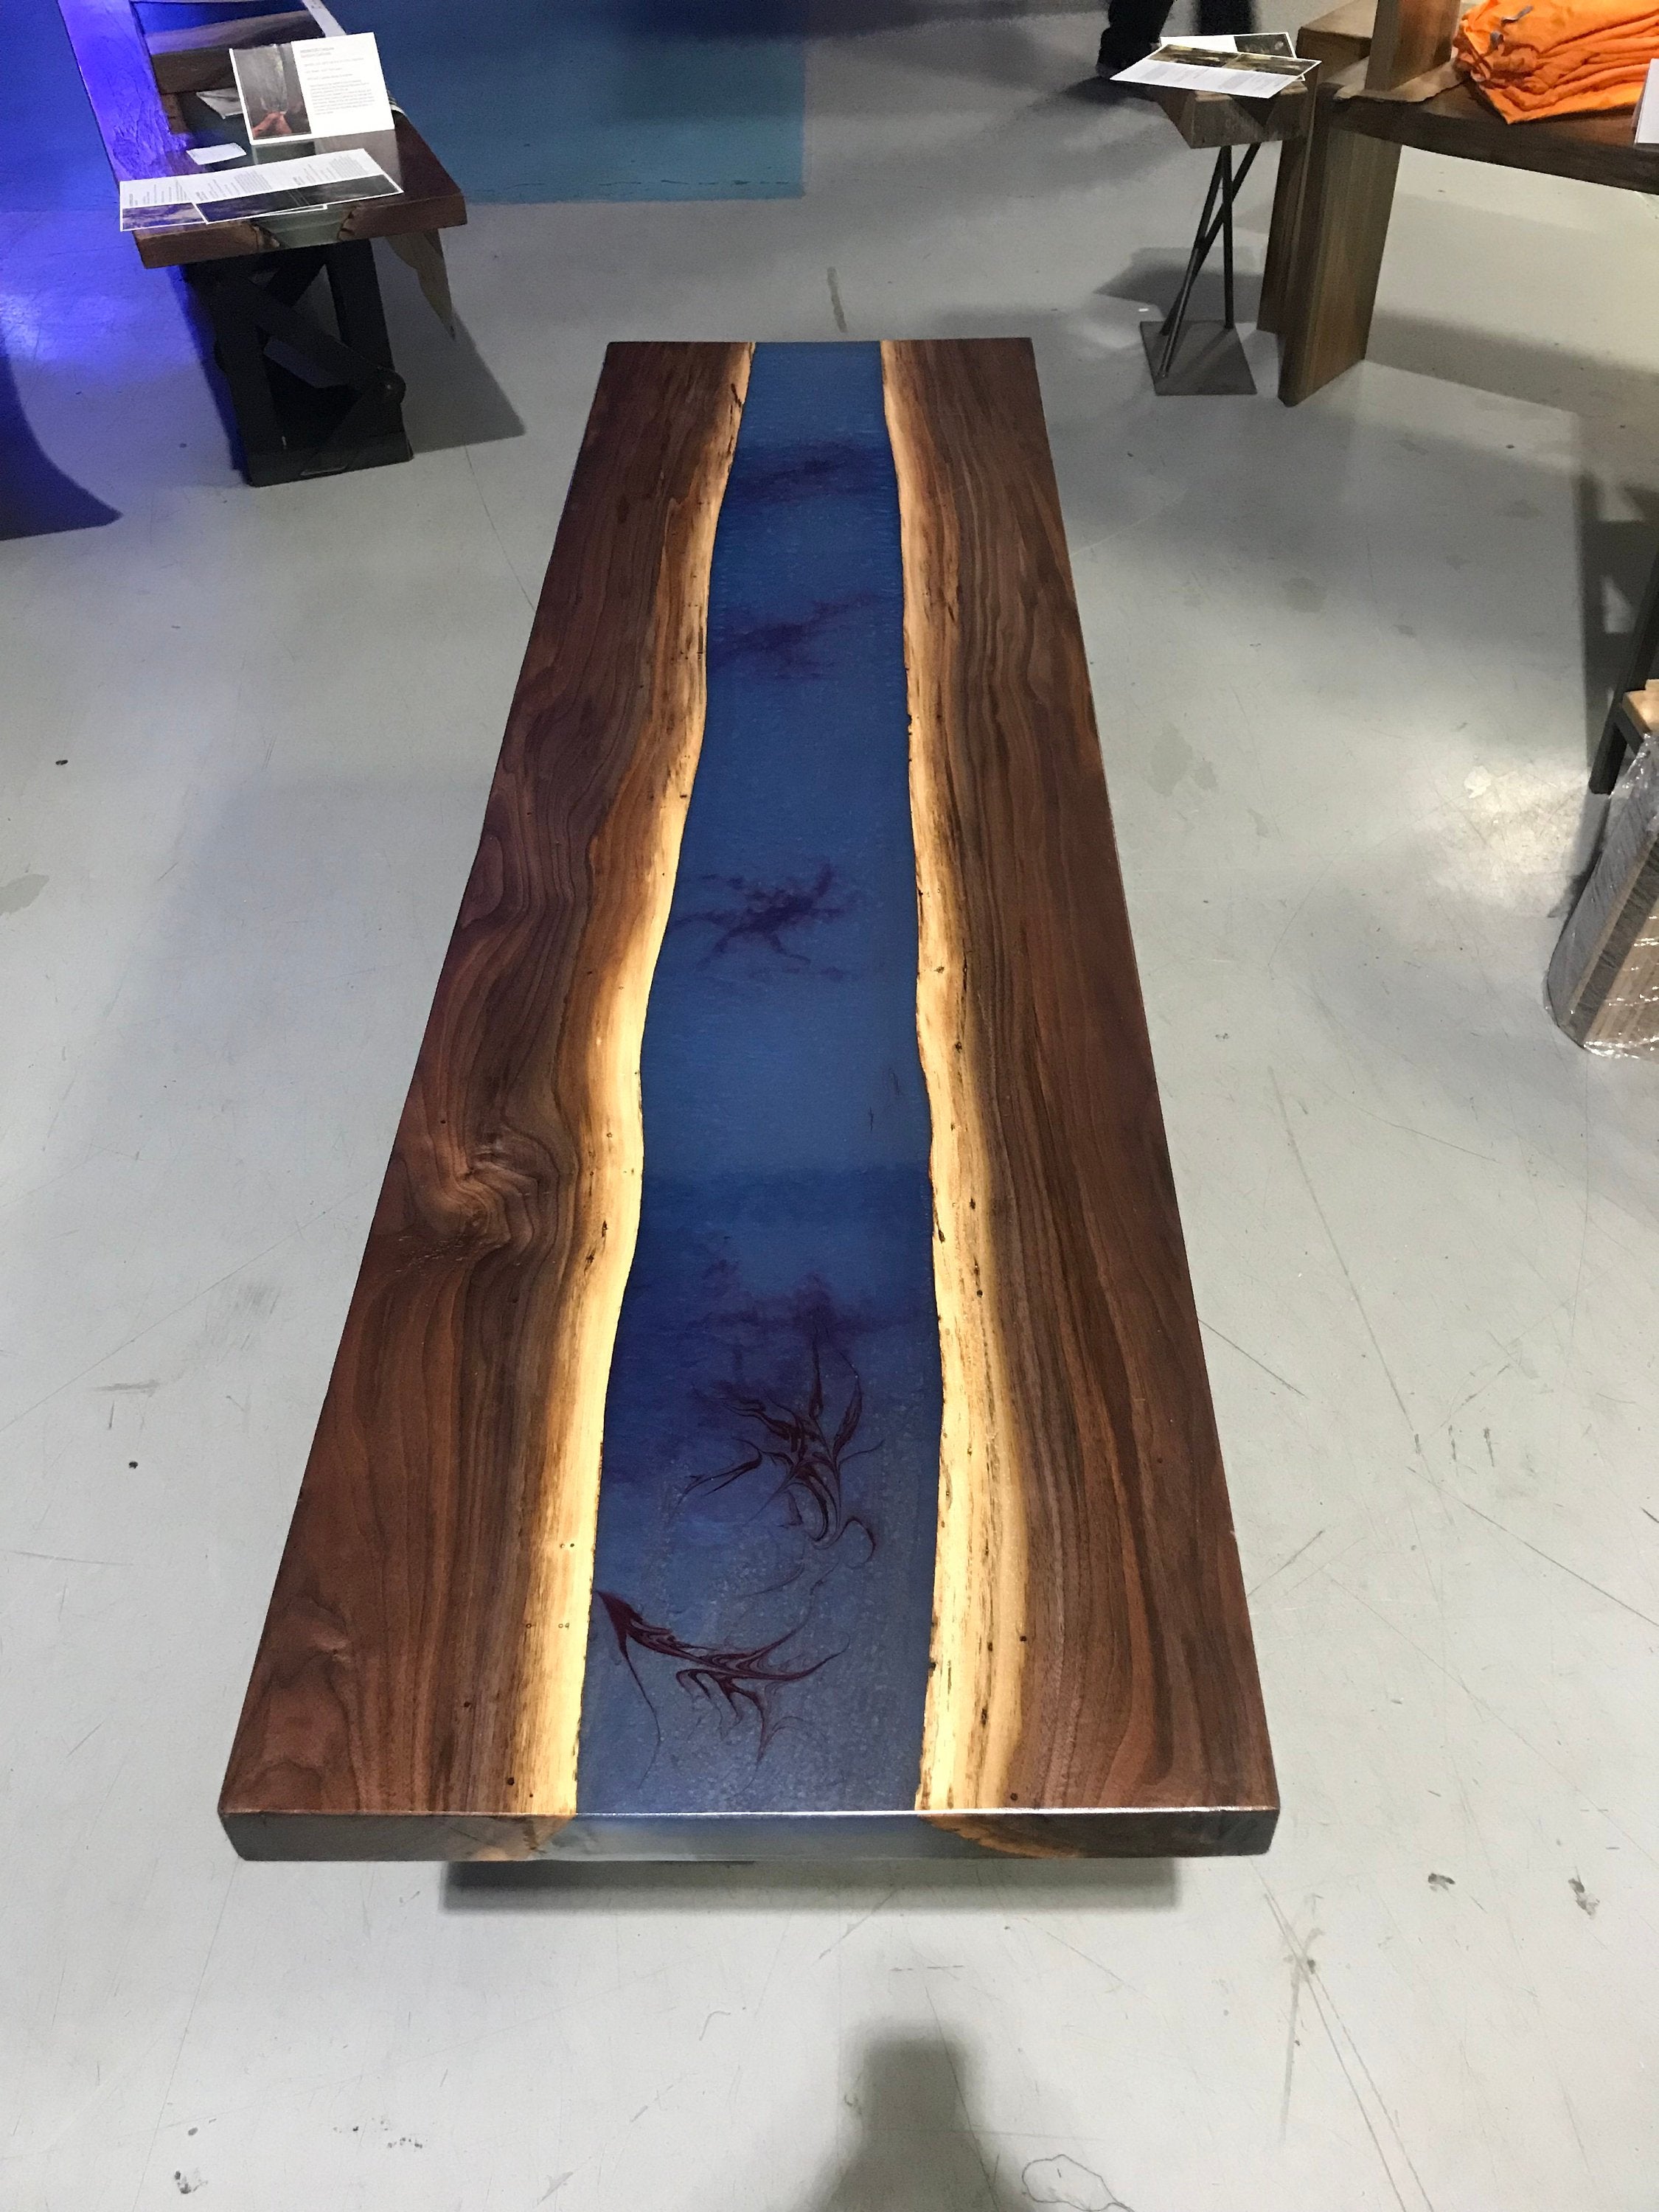 Blue and Black Epoxy Resin Custom Coffee Table with Glass Top